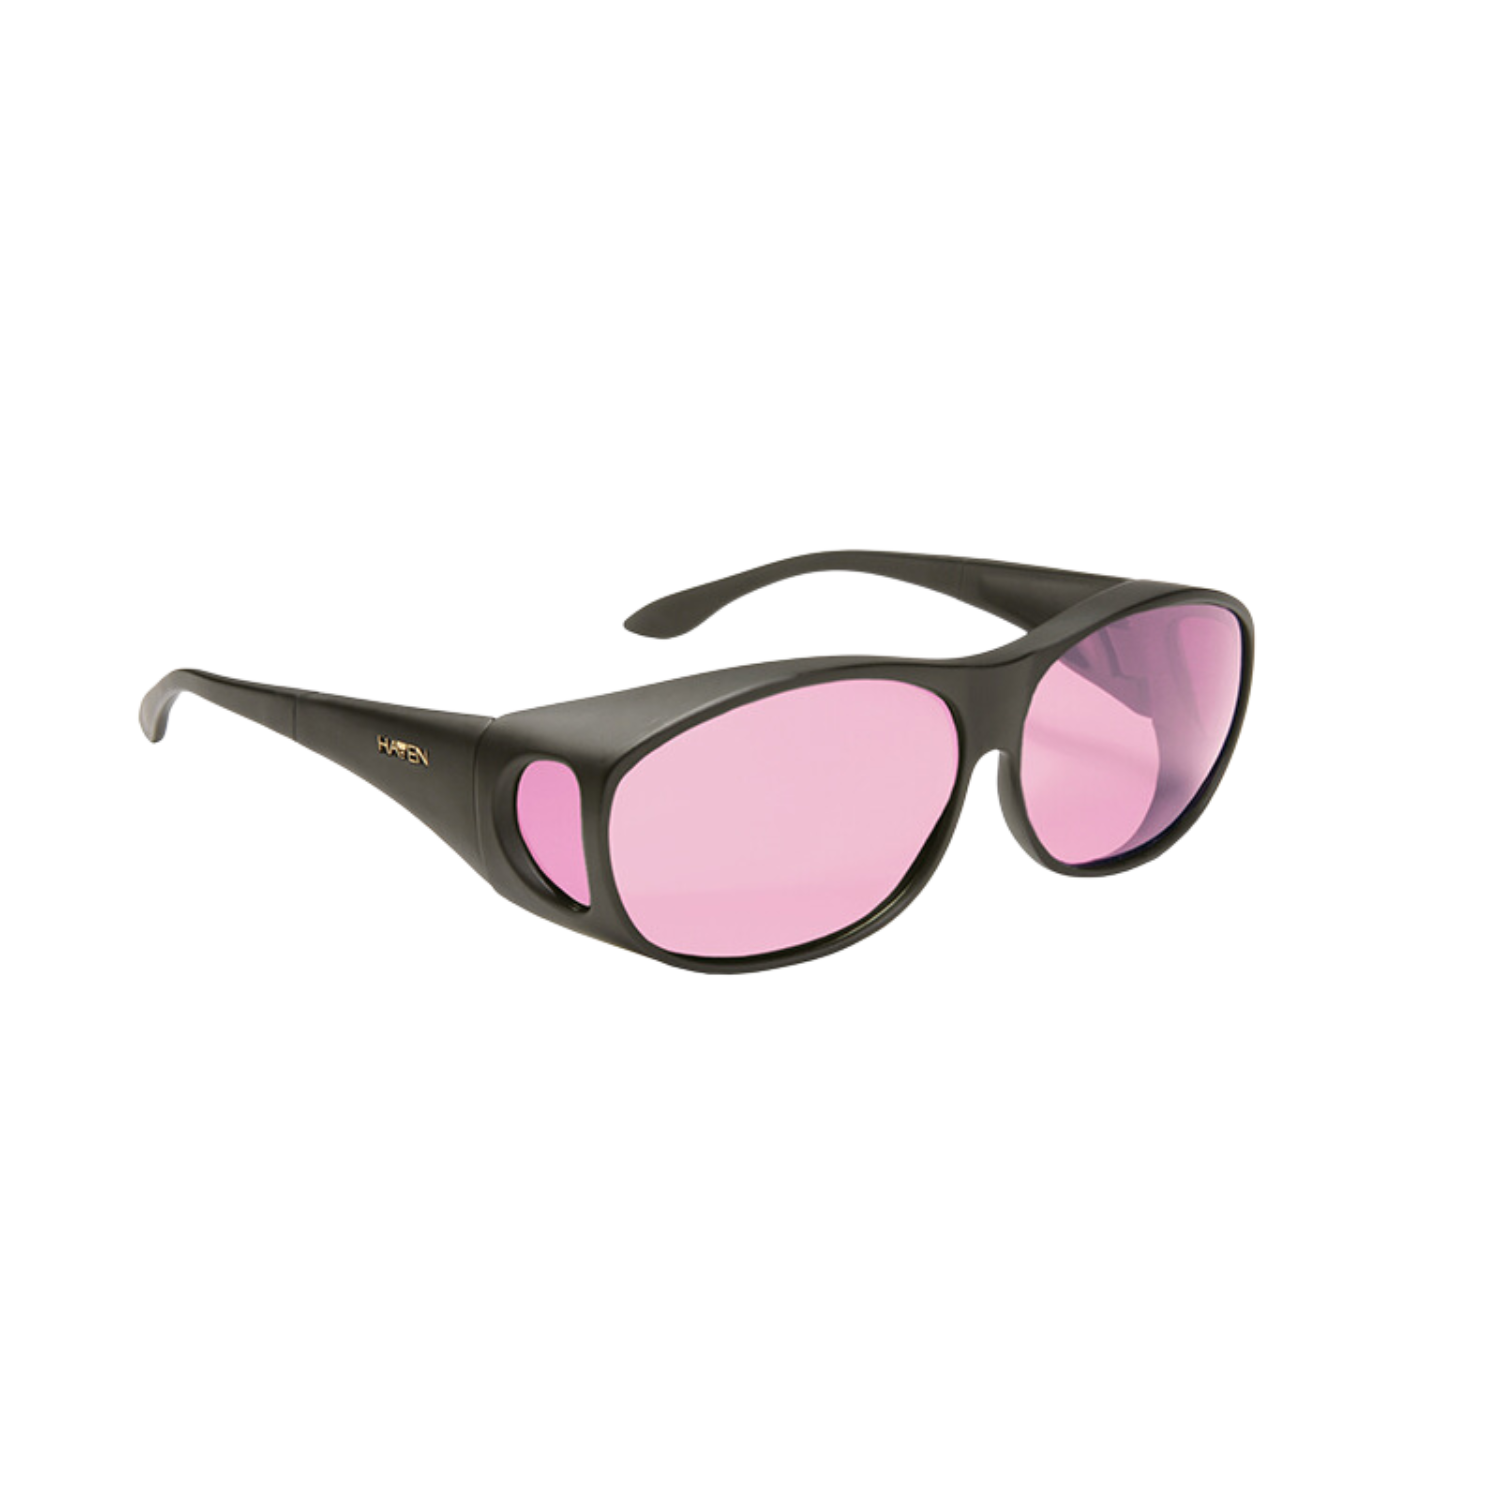 Image of the Maven Meridian FL-41 Glases with light rose tint and medium black frames.